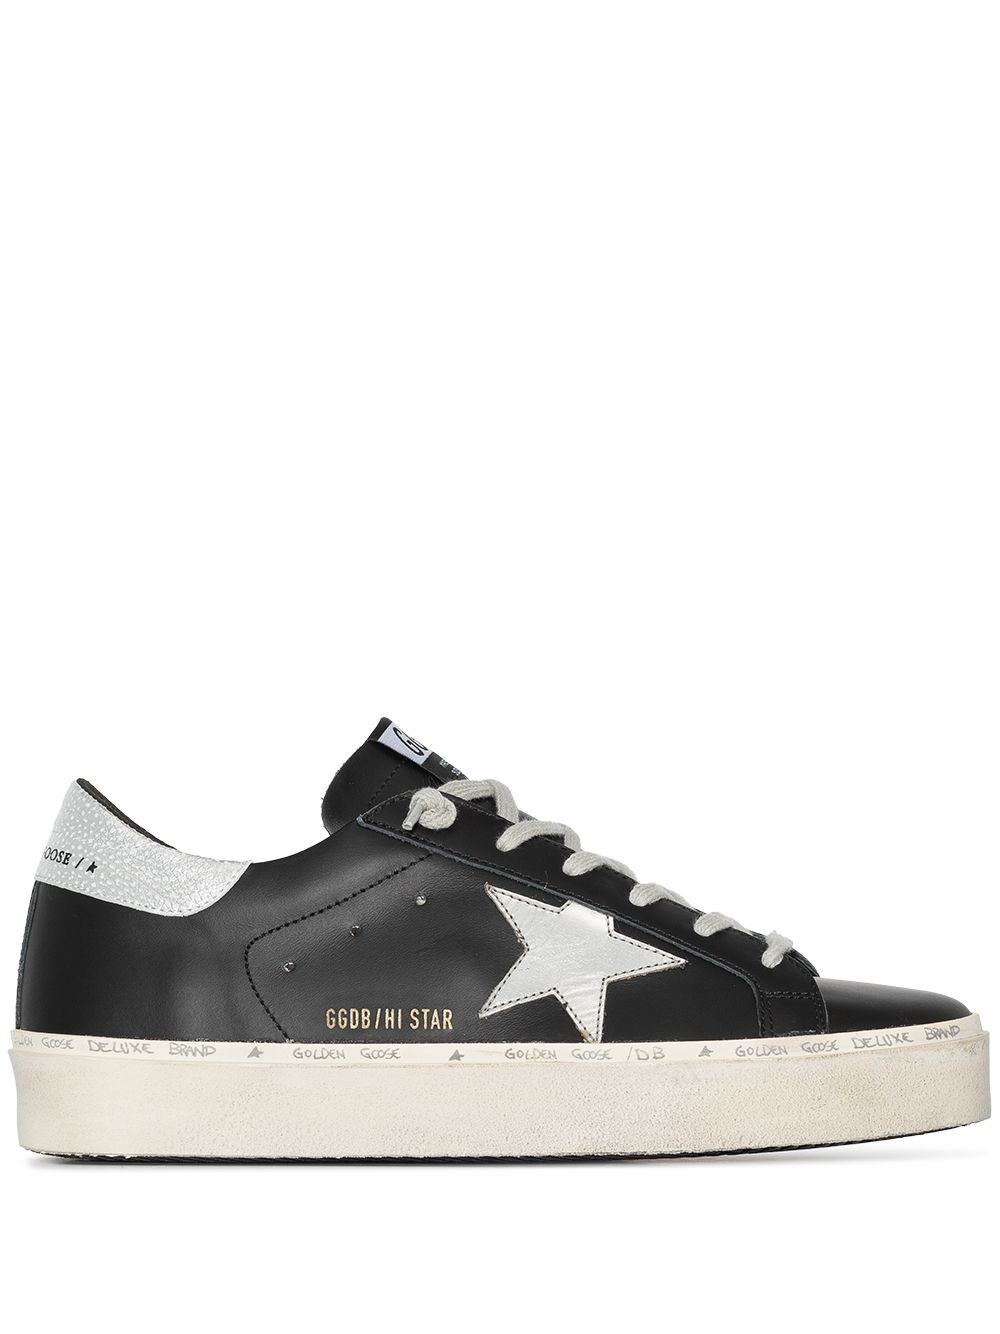 Hi star leather sneakers - 1